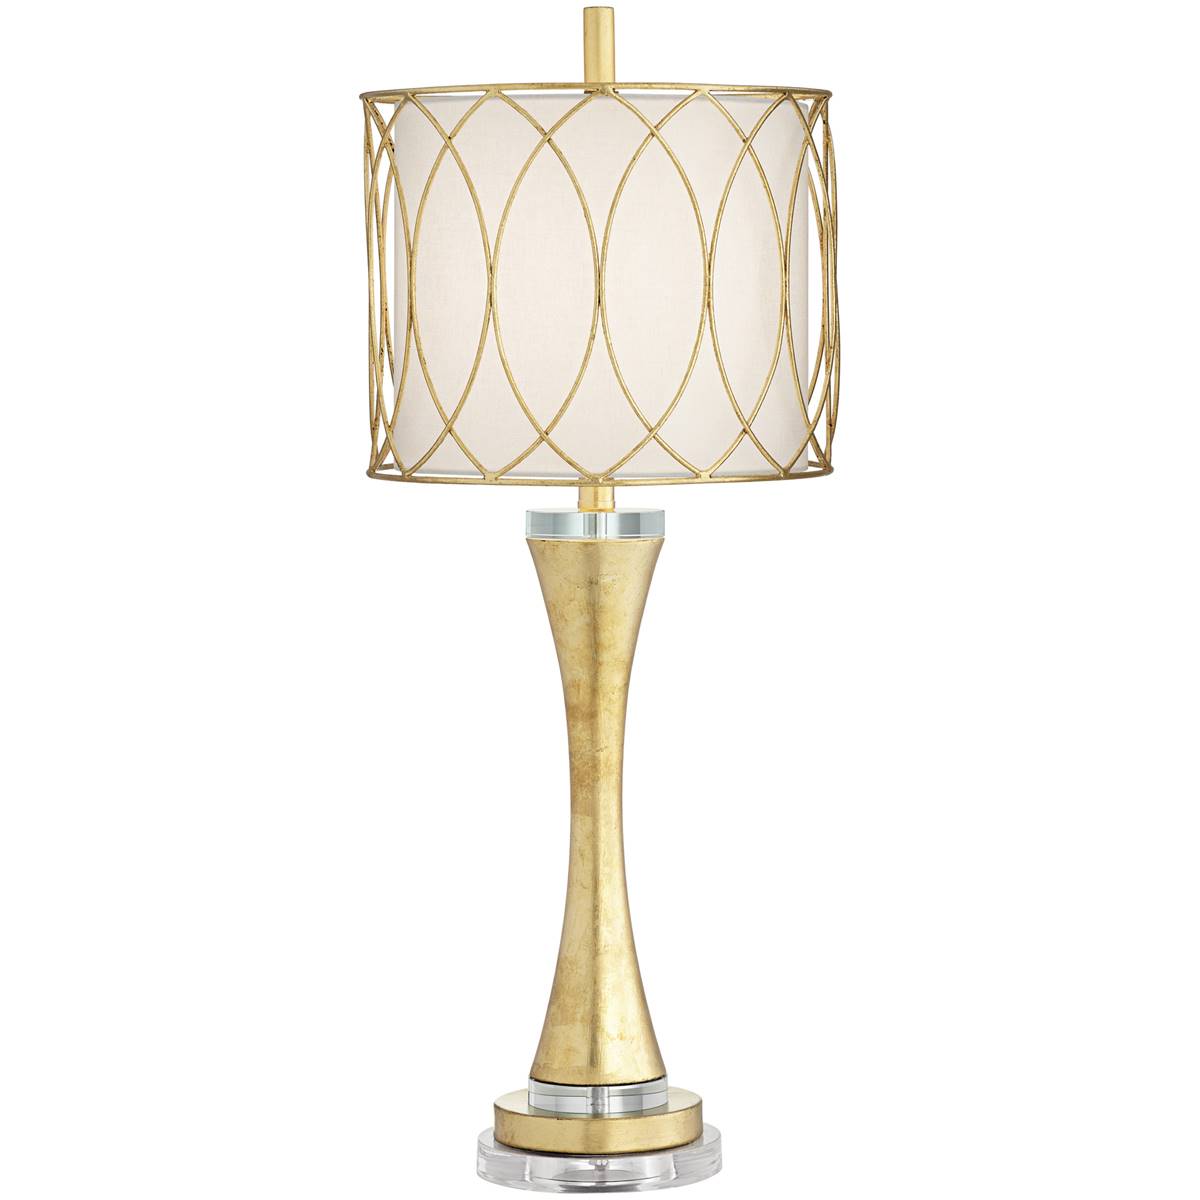 Pacific Coast Lighting Trevizo 32in. Golf Leaf Table Lamp